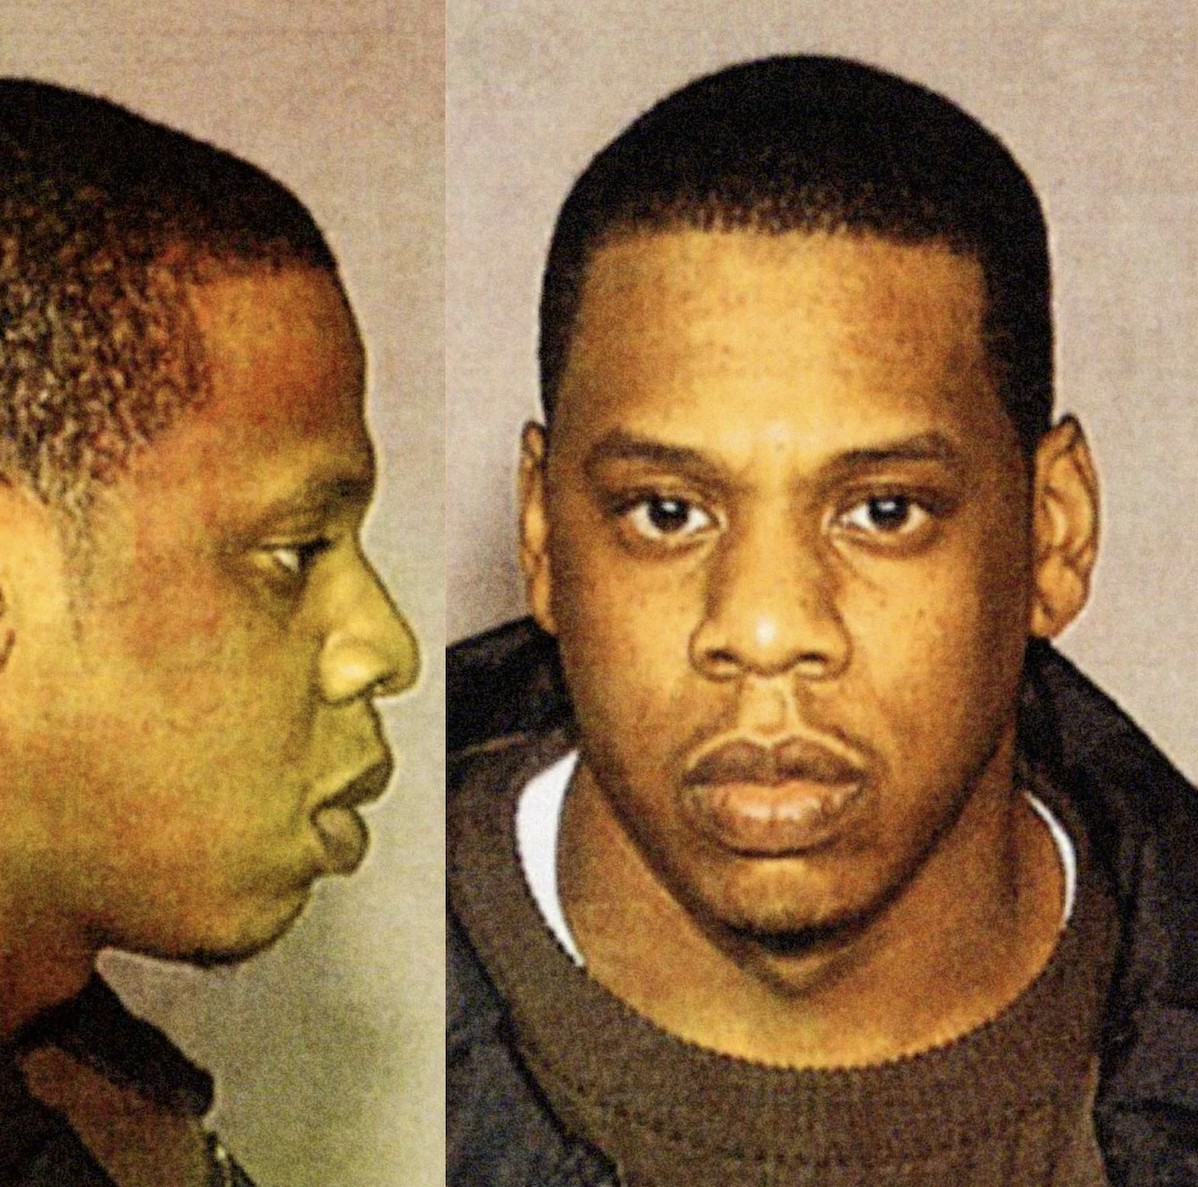 In 1999, Jay-Z was arrested for stabbing a record producer. Despite facing a 15 year sentence, he escaped with probation. 